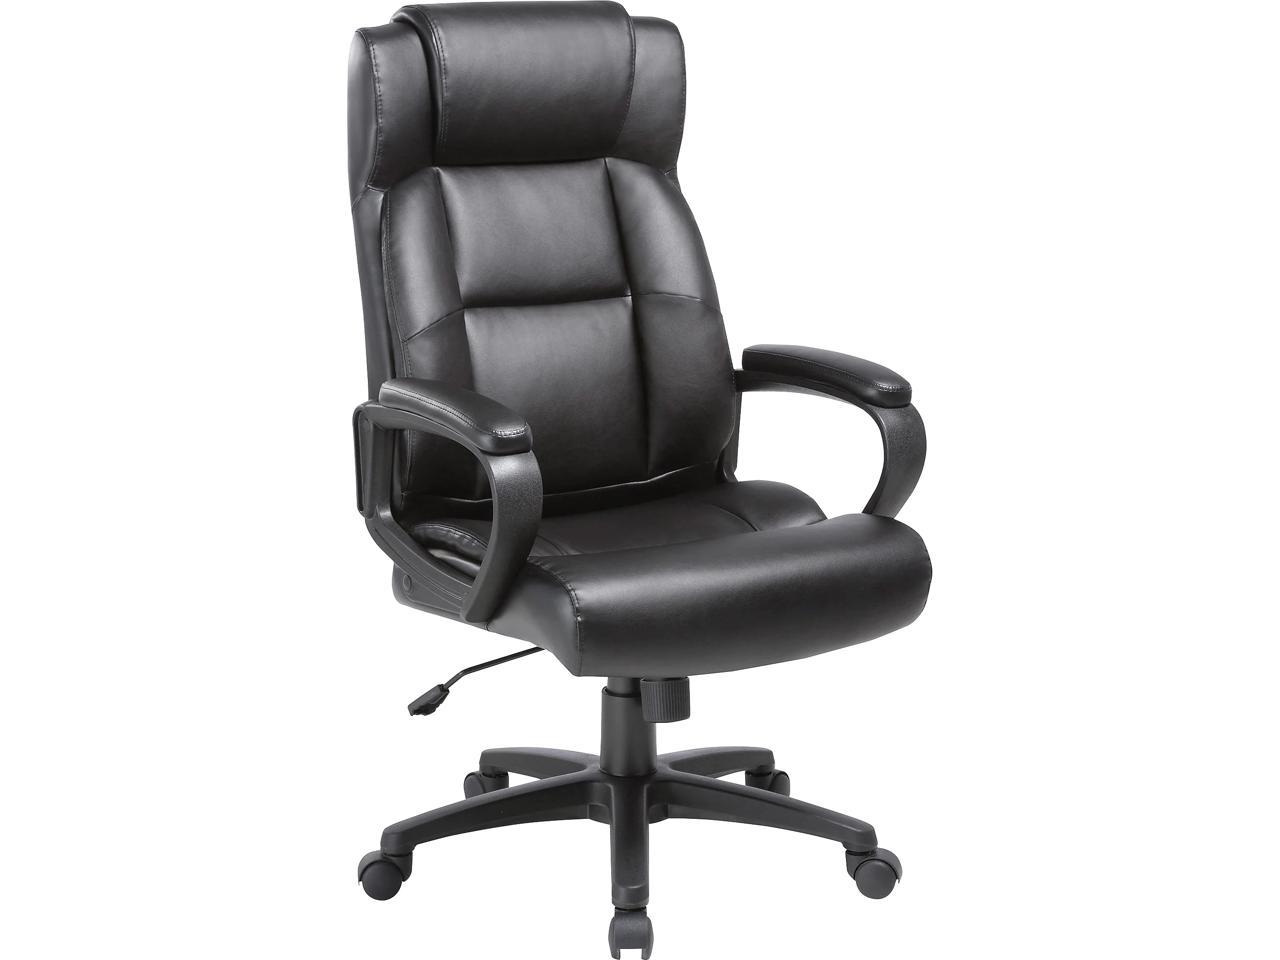 Lorell Soho High-back Leather Executive Chair - Black Bonded Leather Seat - Black Bonded Leather Back - 5-star Base - 18.39" Seat Width - 28.5" Length x 29" Width x 28" Depth x 46" Height - 1 Each - image 2 of 7